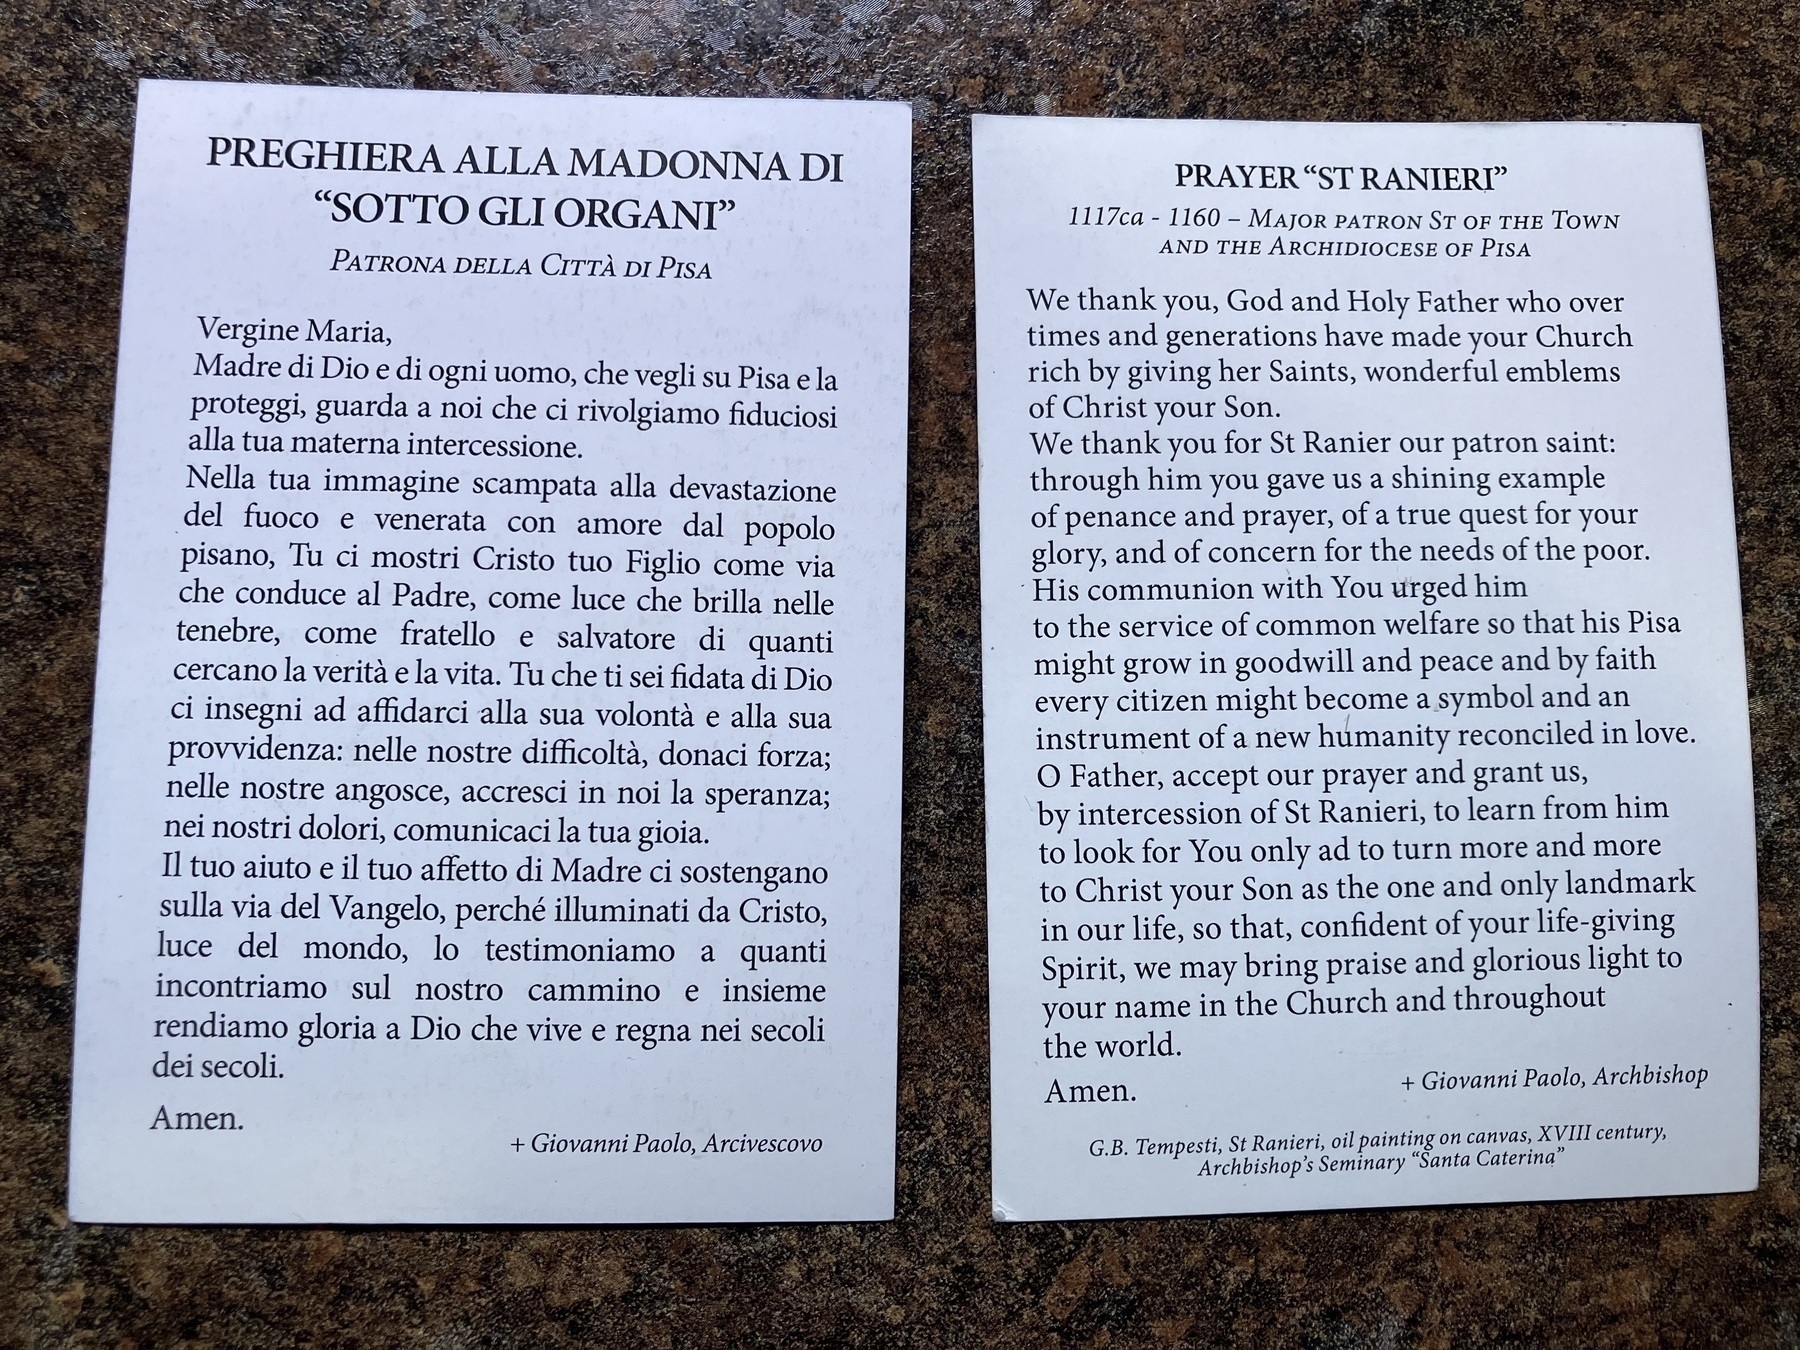 Auto-generated description: The image shows two texts side by side, one in Italian and one in English, containing prayers and religious invocations to the Madonna of Pisa and Saint Ranieri.